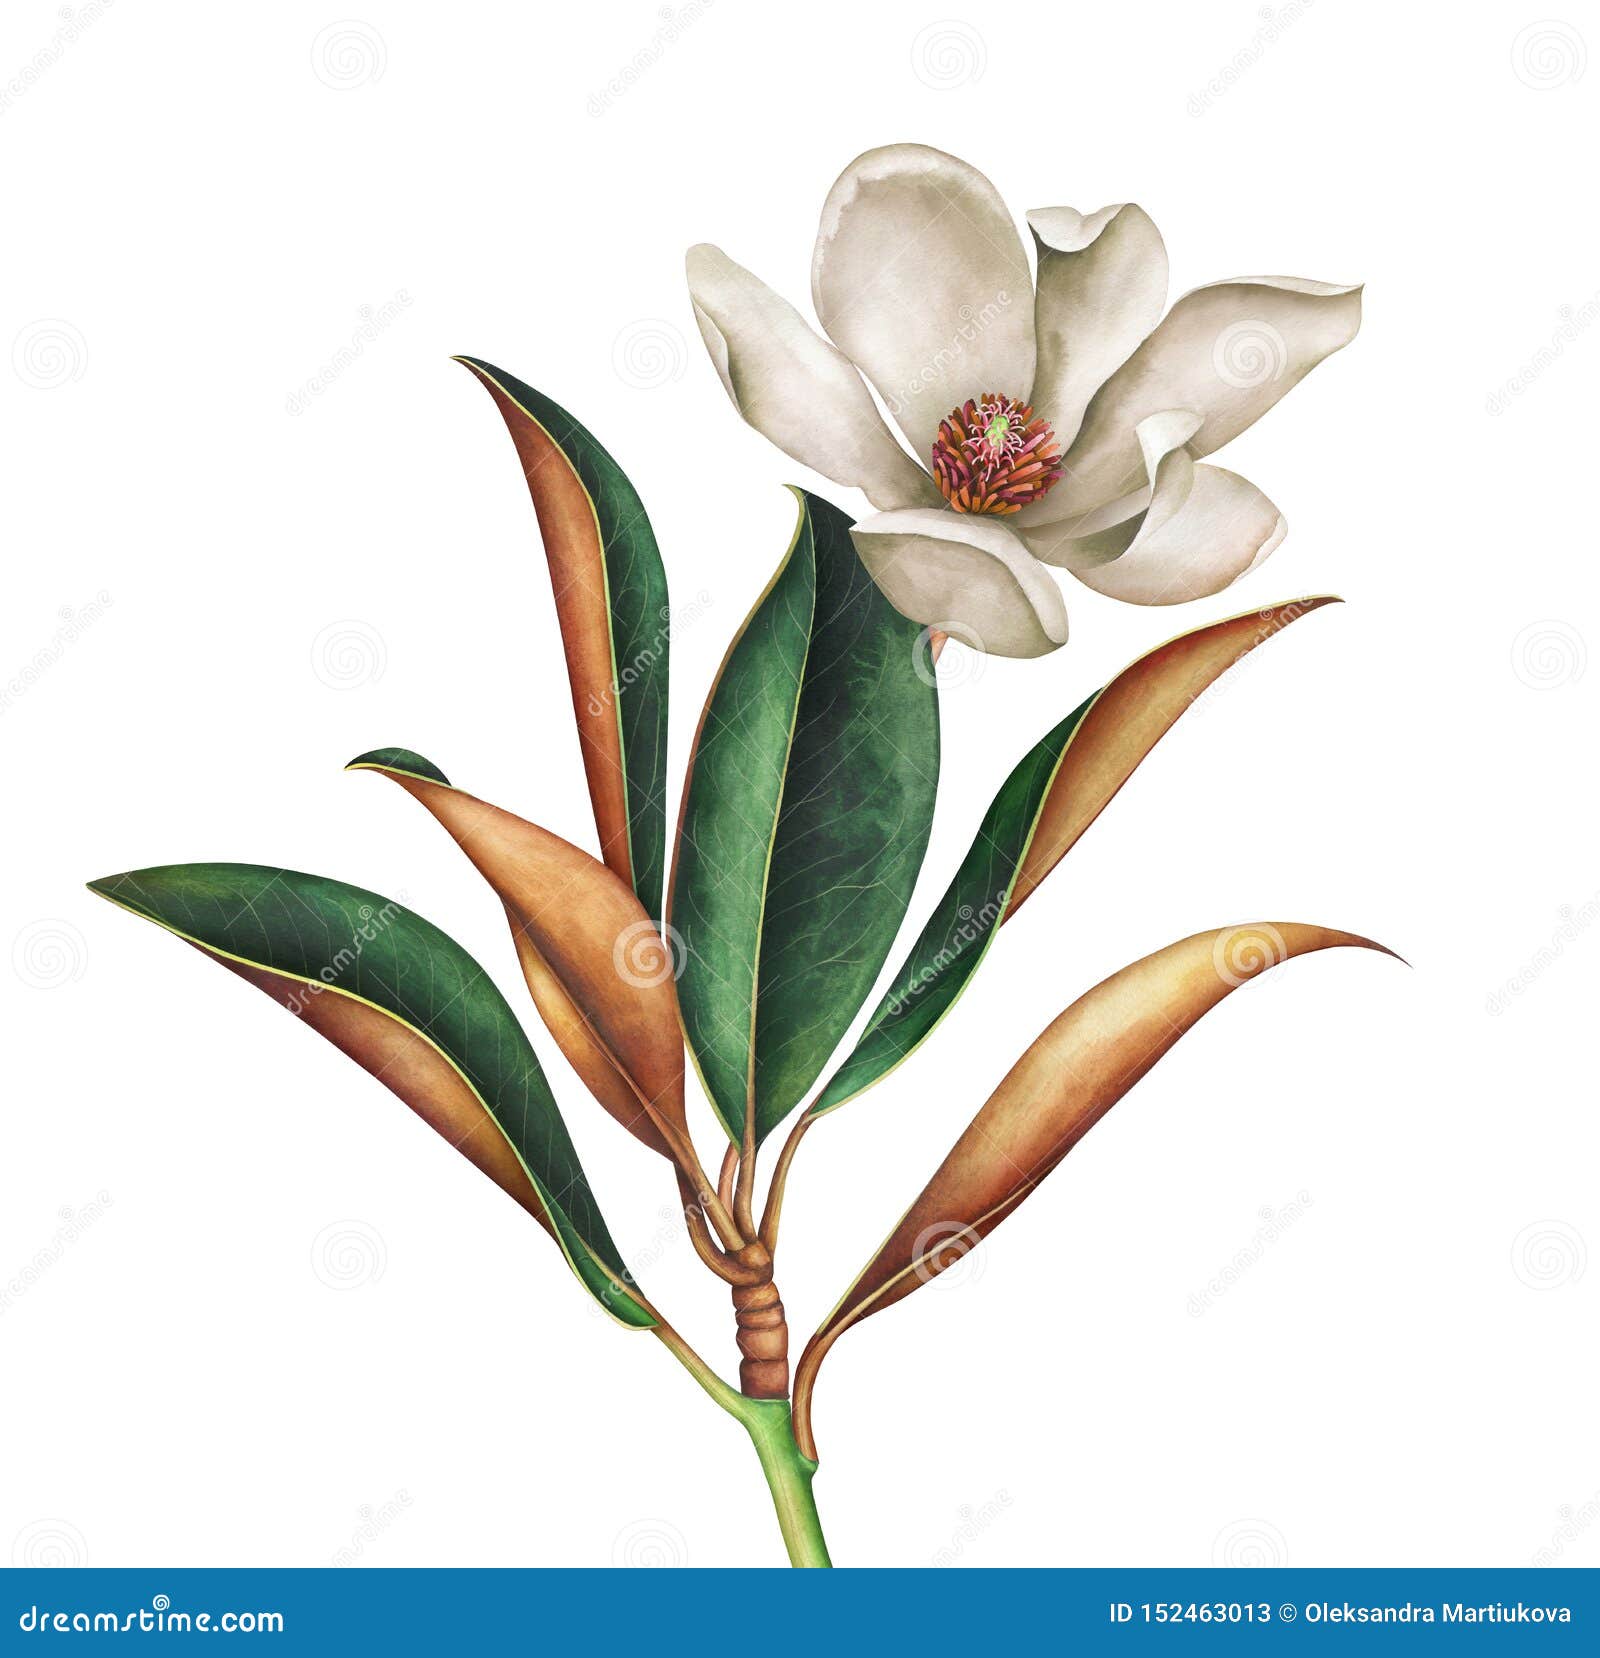 Magnolia Branch With Leaves And White Flower Isolated On White Background Watercolor Illustration Stock Illustration Illustration Of Floral Leaves 152463013